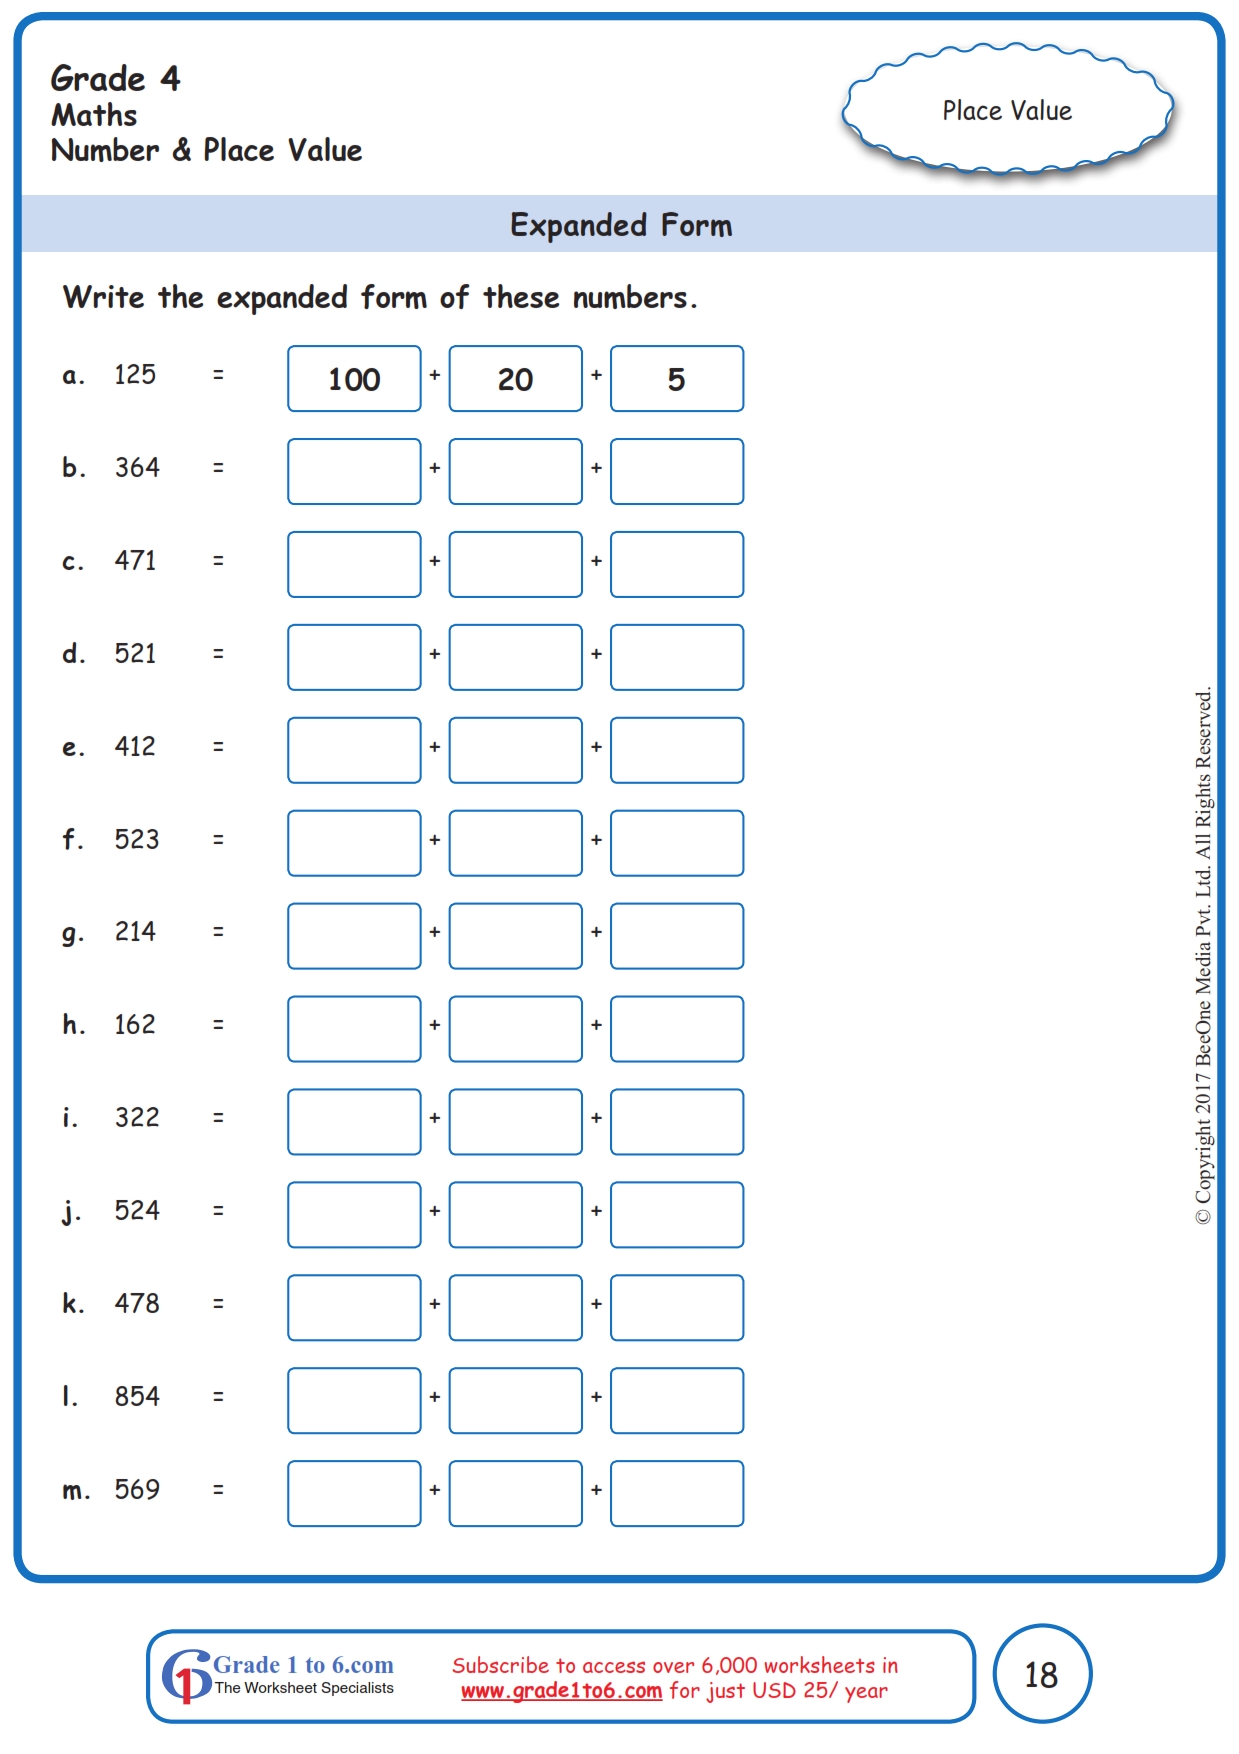  Expanded Form Of A Number Worksheets Grade 4 www grade1to6